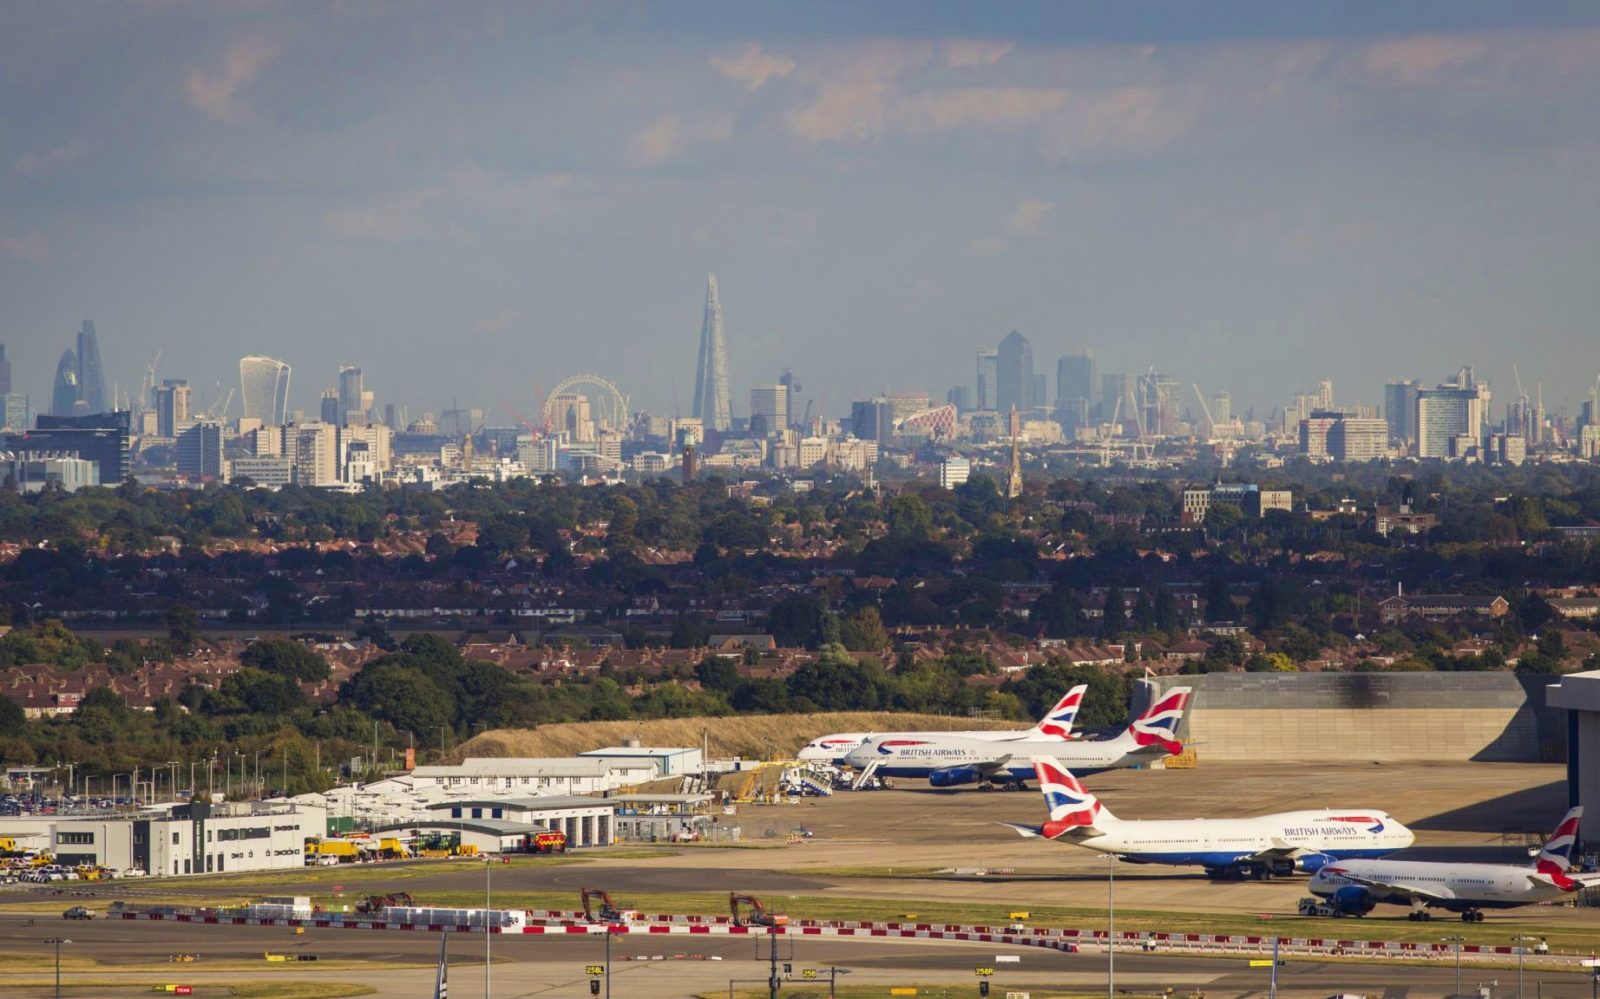 Heathrow Airport runway closed after drone sighting